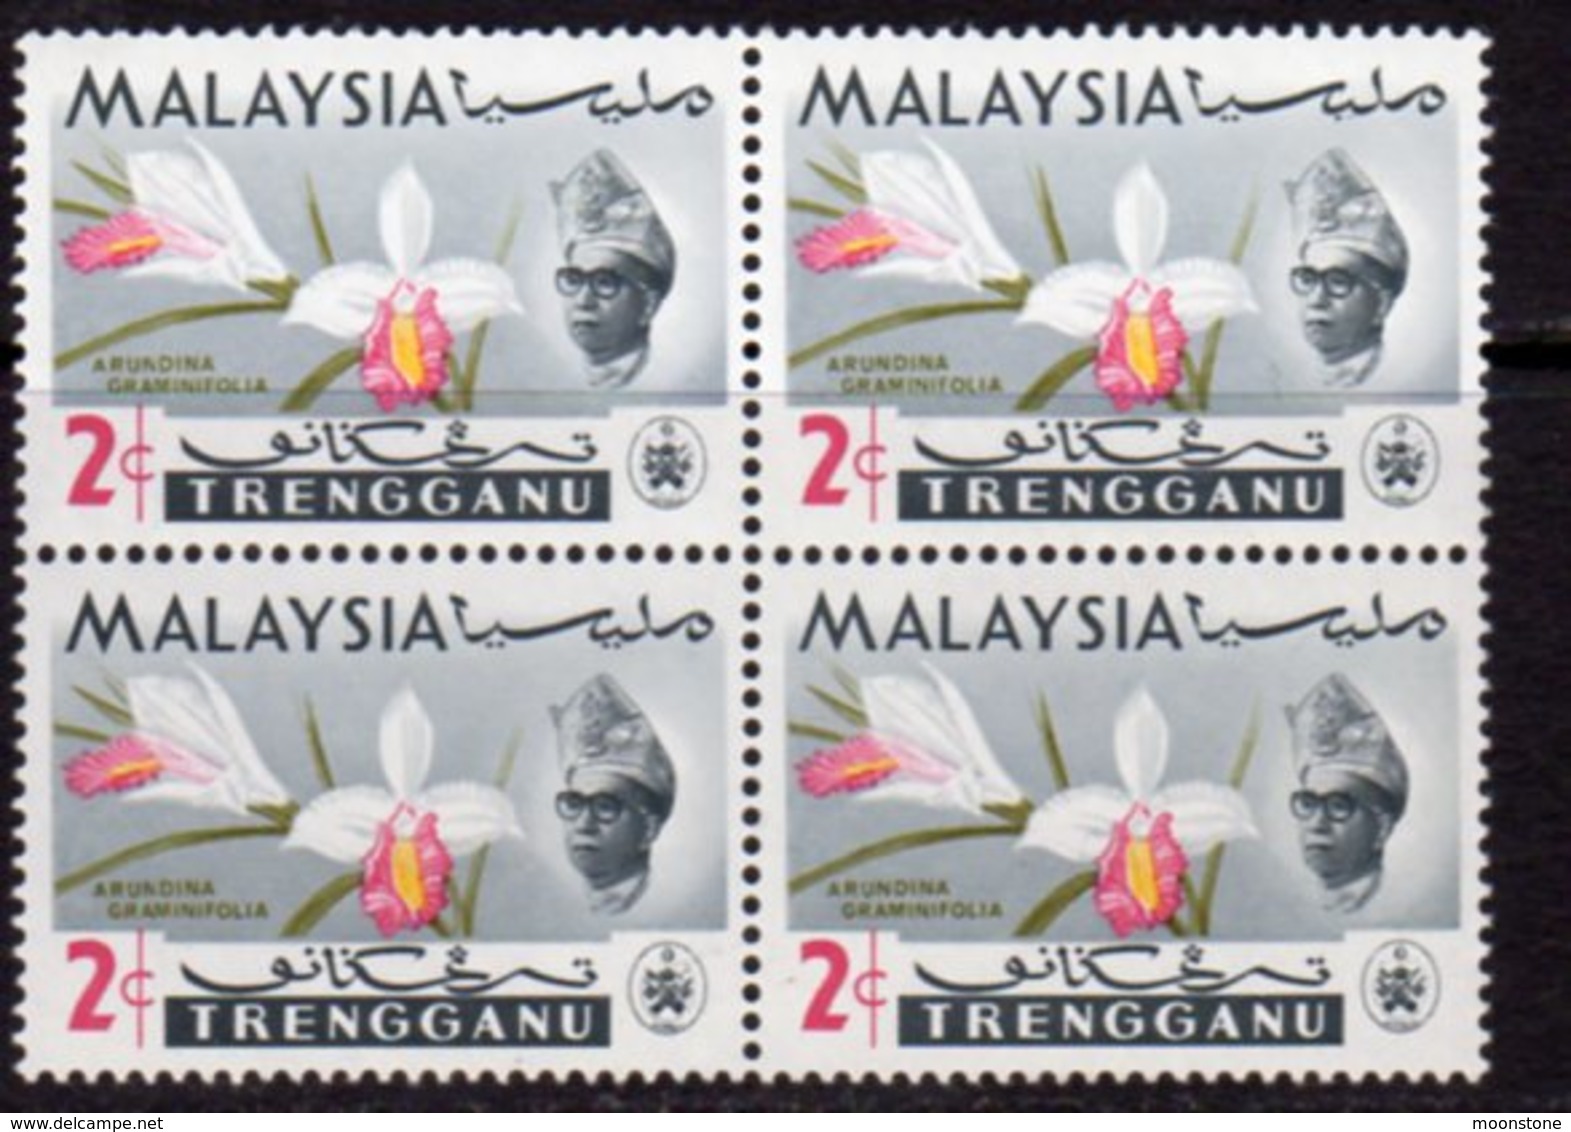 Malaysia Trengganu 1965 Orchids 2c Value Block Of 4, 'olive Printing Shifted To Right', (top Right), MNH, SG 101 - Malaysia (1964-...)